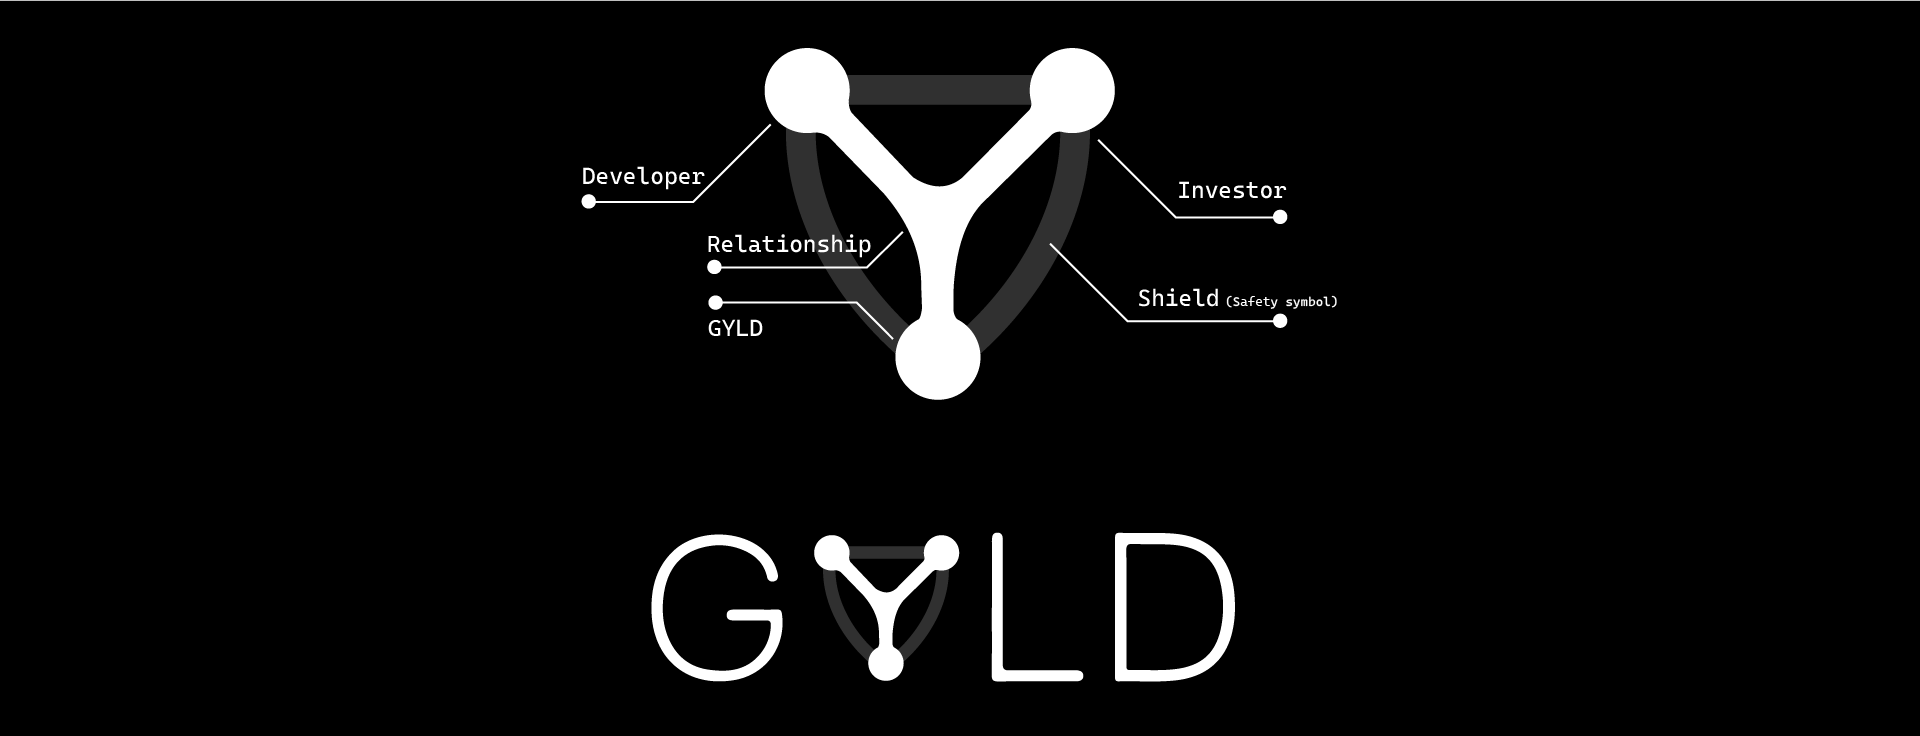 GYLD_3.png